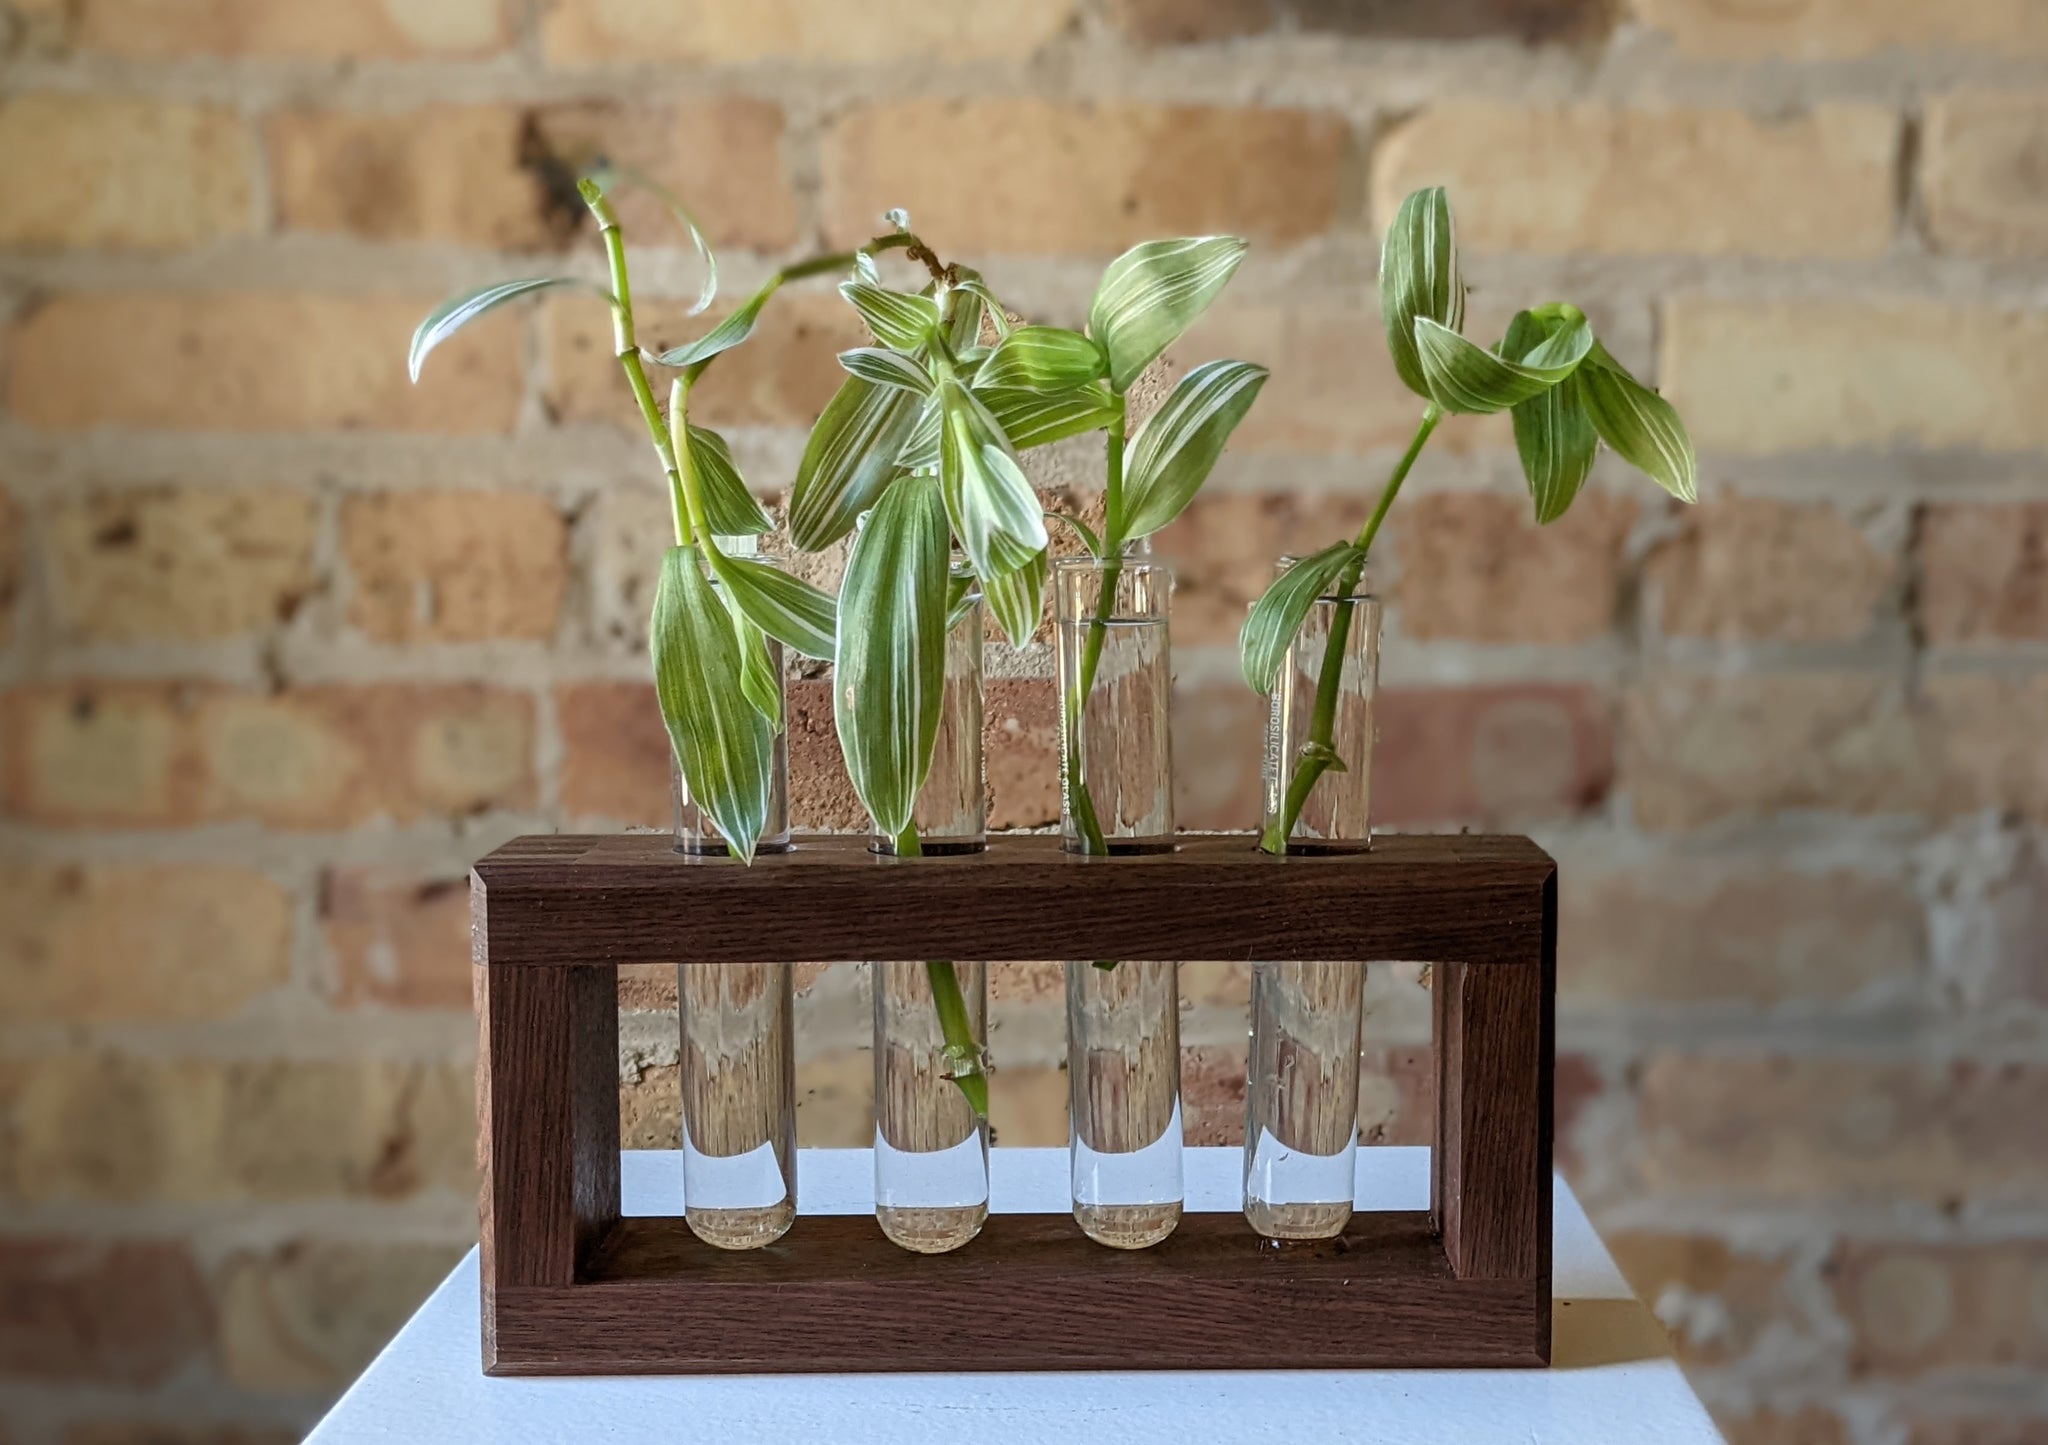 Houseplant Care 101: Simple Water Propagation